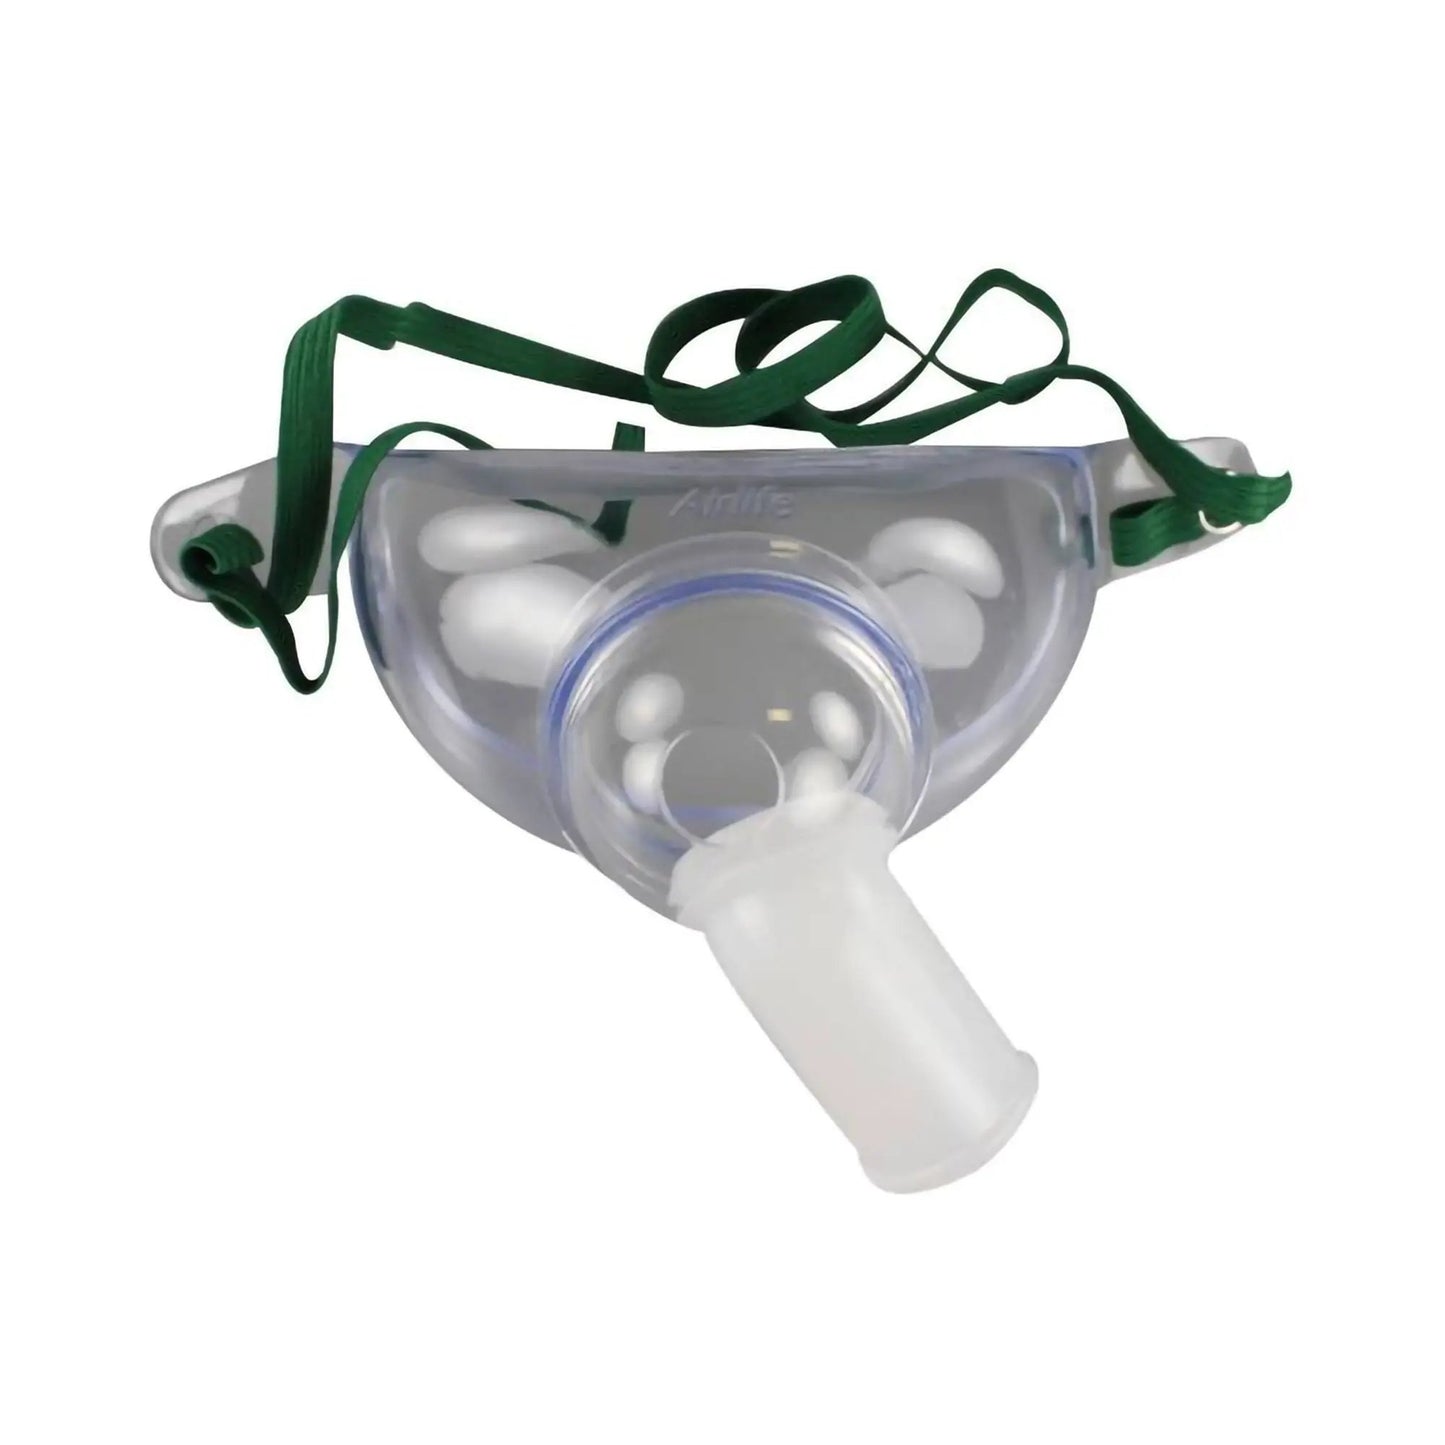 Vyaire Medical AirLife Adult Aerosol Trach Mask, One Size Fits Most